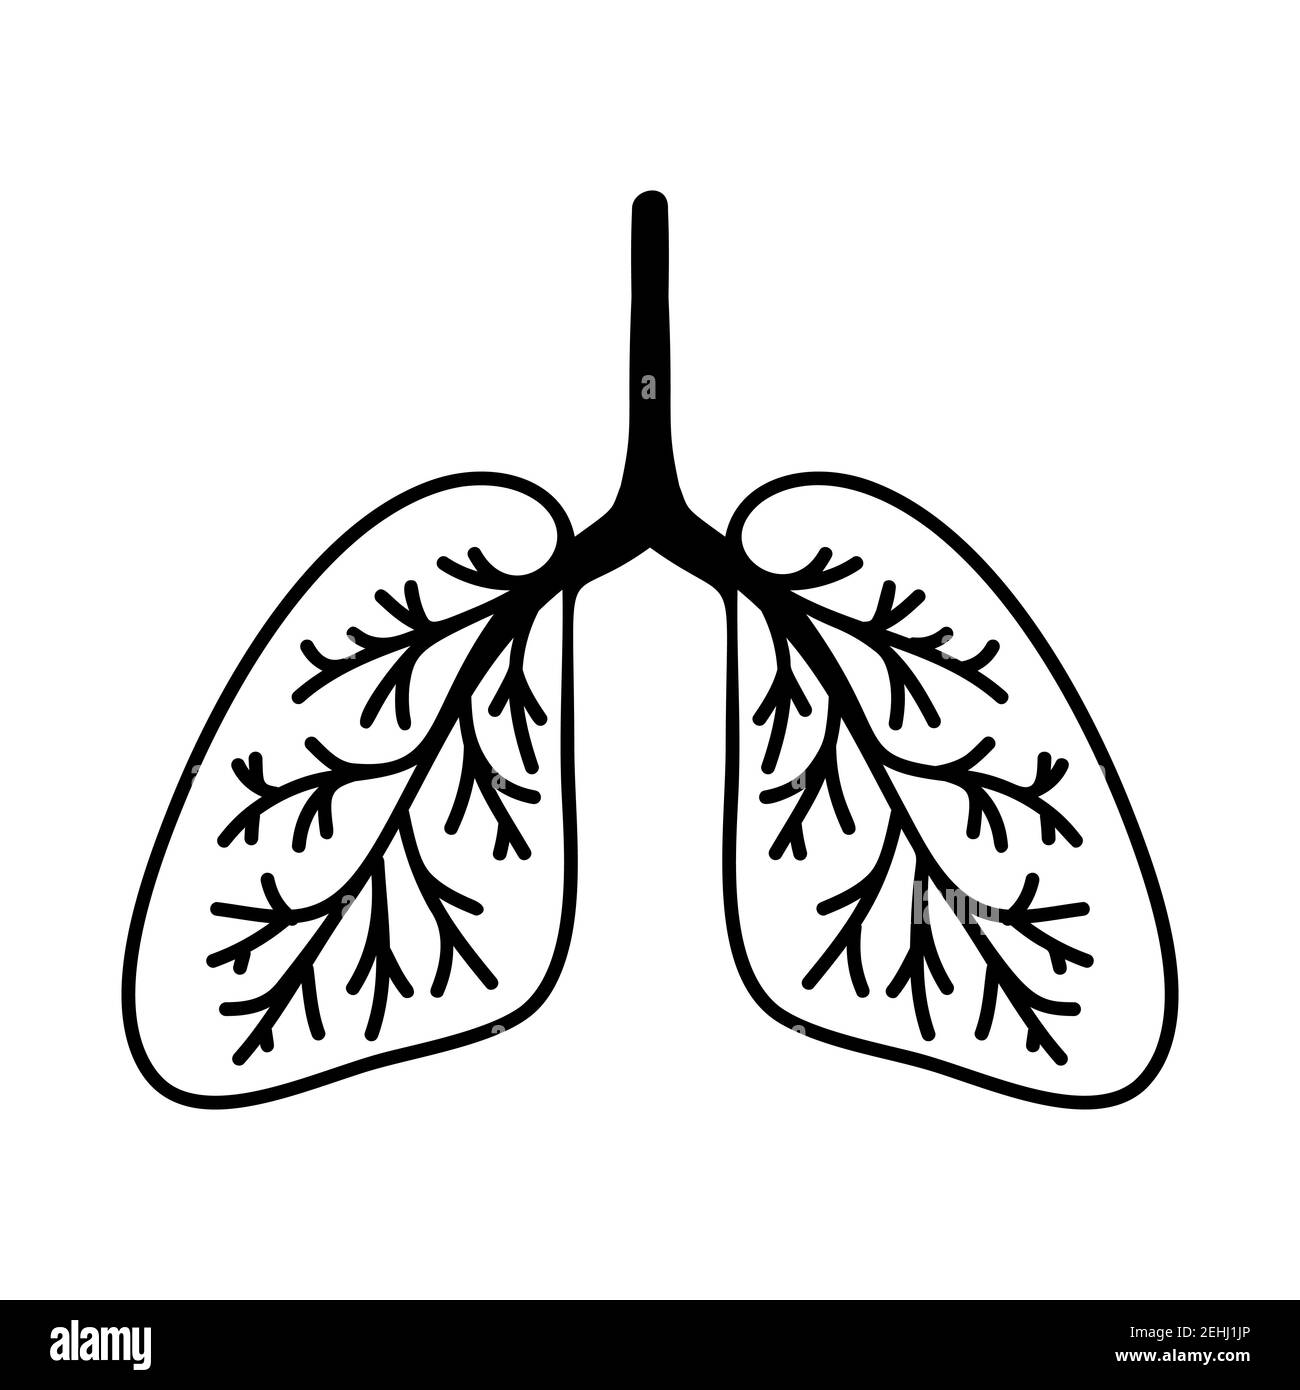 Simple hand drawn lungs illustration. Isolated on a white background. Stock Vector